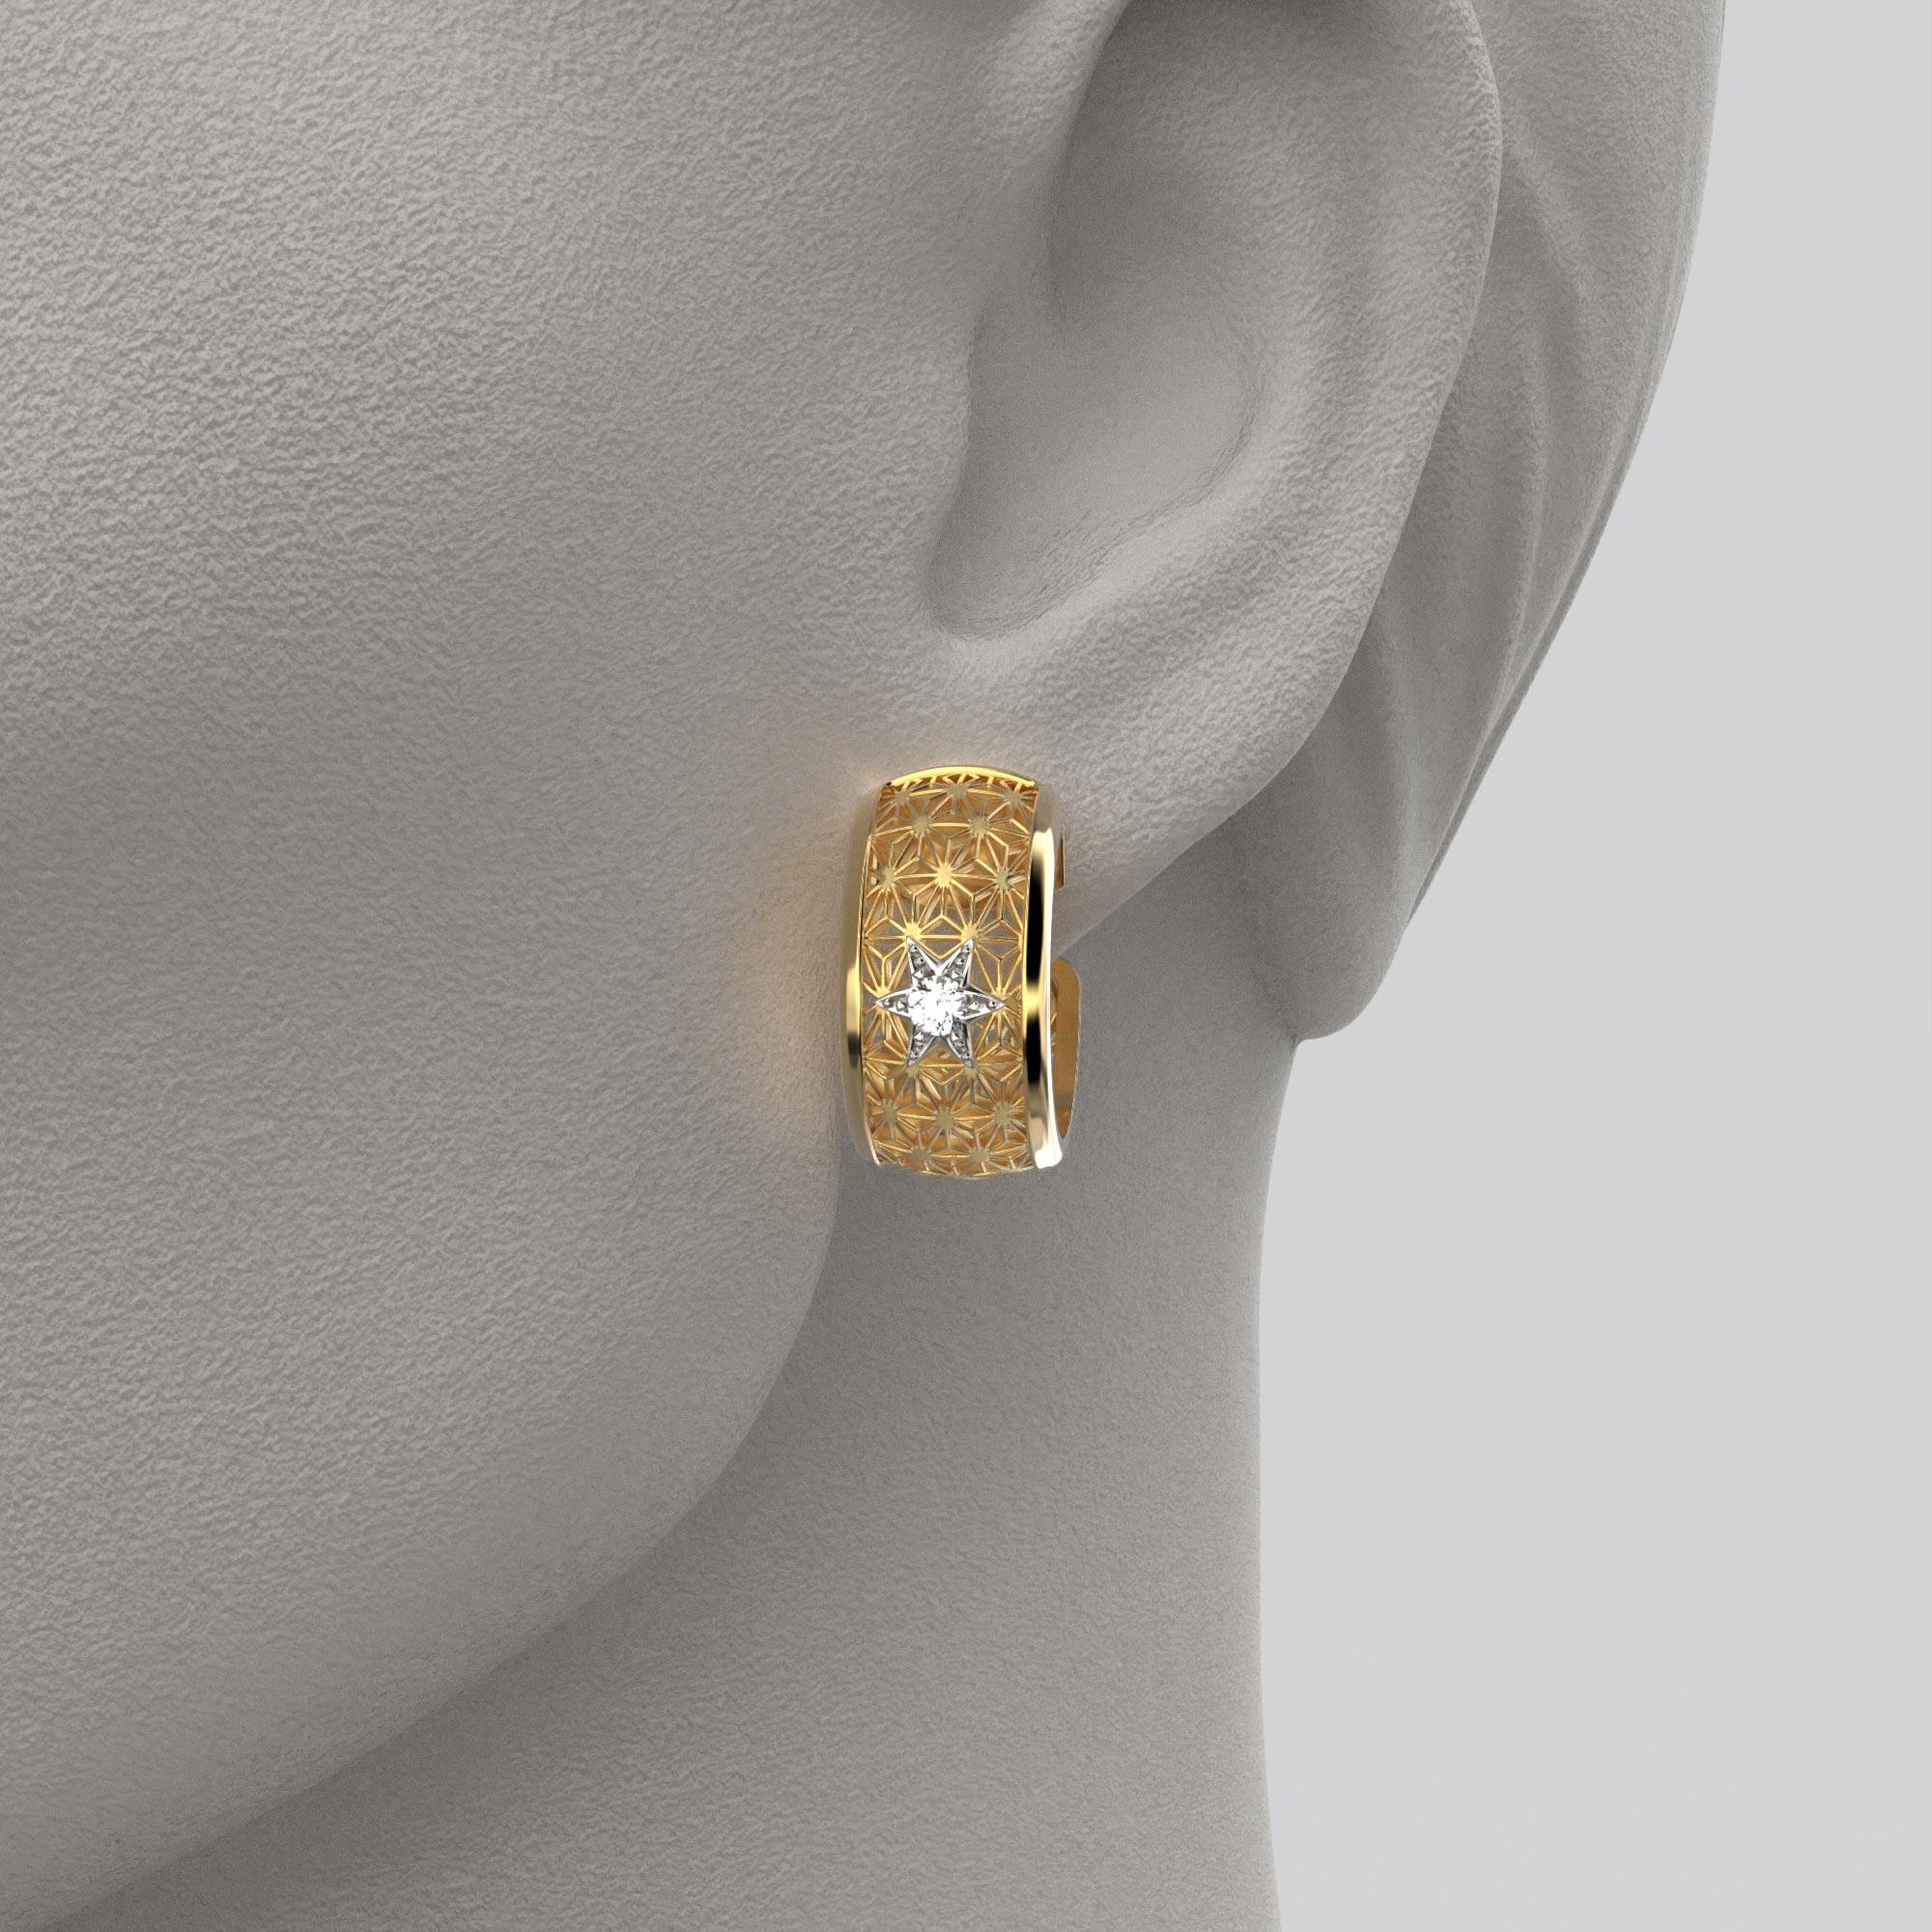 Brilliant Cut Oltremare Gioielli Diamond Hoop Earrings 18k Gold Made in Italy, Sashiko Pattern For Sale